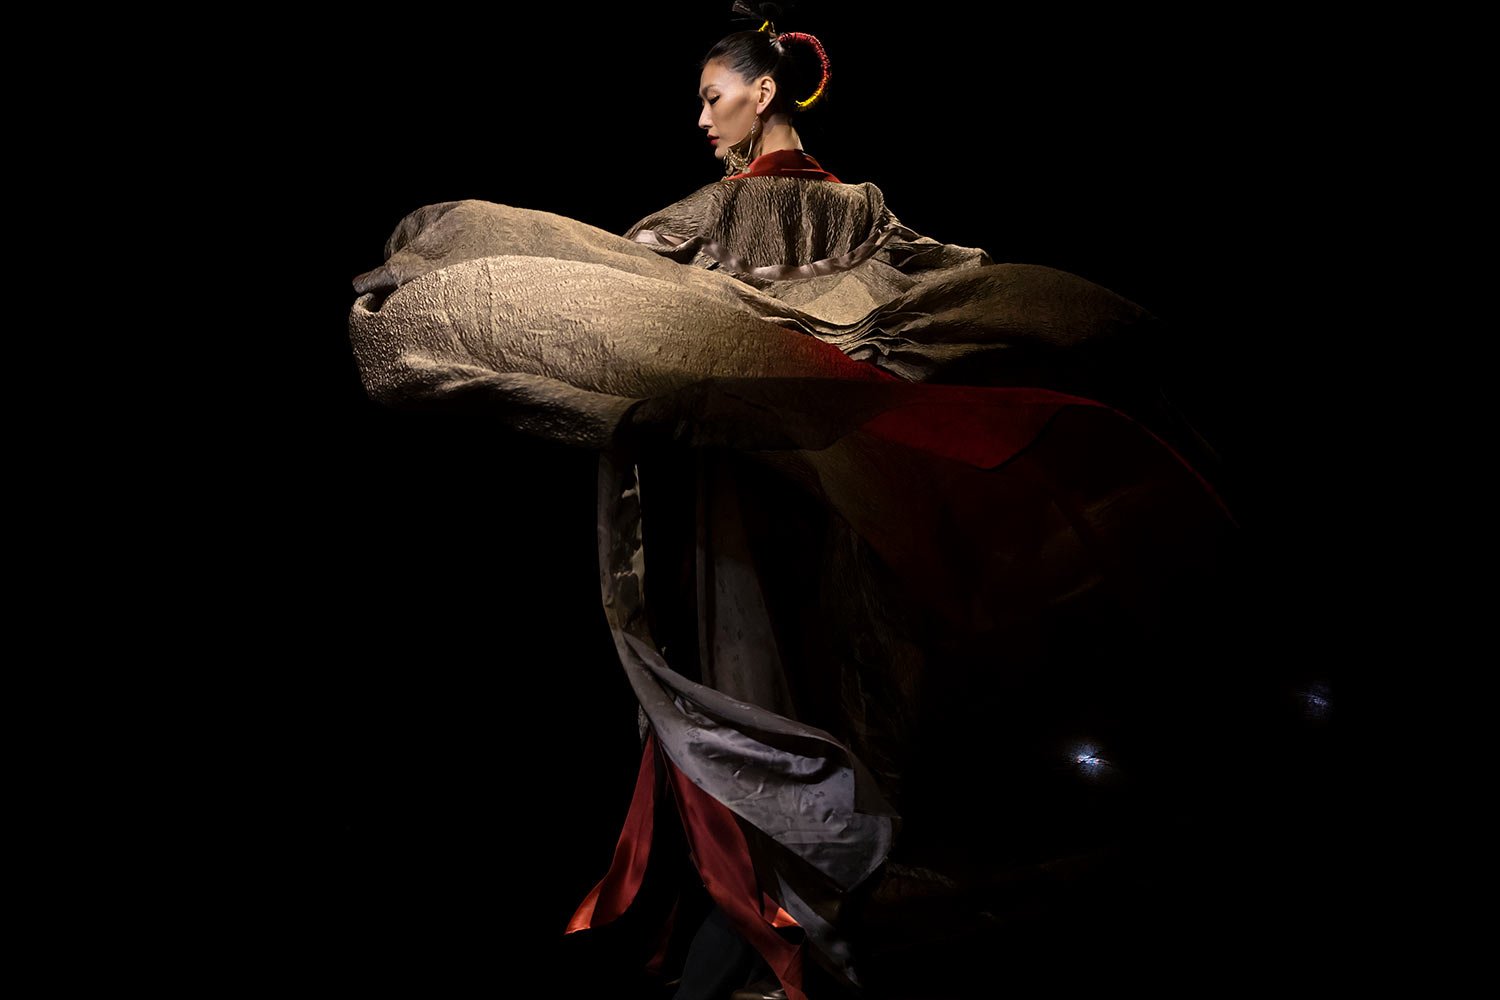  A model presents a creation by Chinese designer Ma Guai in their Subai collection during the China Fashion Week in Beijing, Saturday, Sept. 10, 2022. (AP Photo/Mark Schiefelbein) 